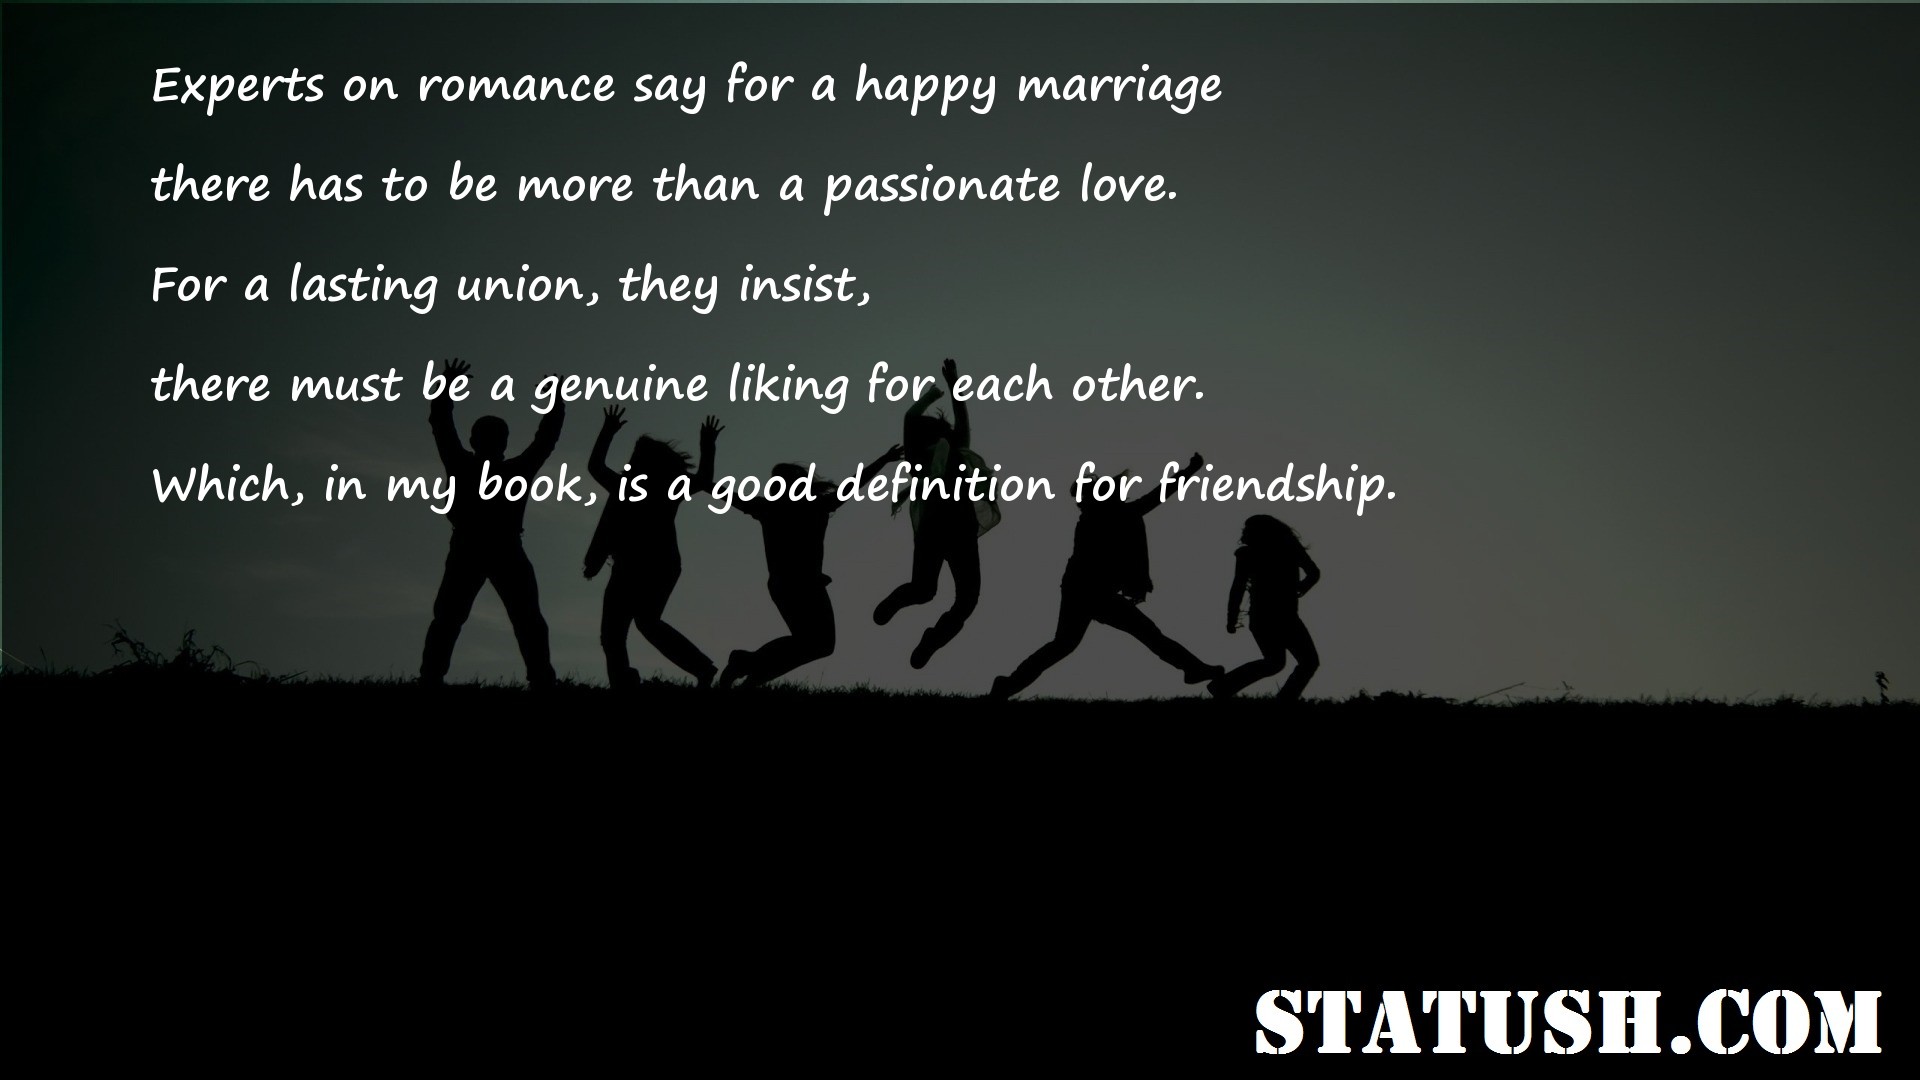 Experts on romance say for a happy marriage - Friendship Quotes at statush.com